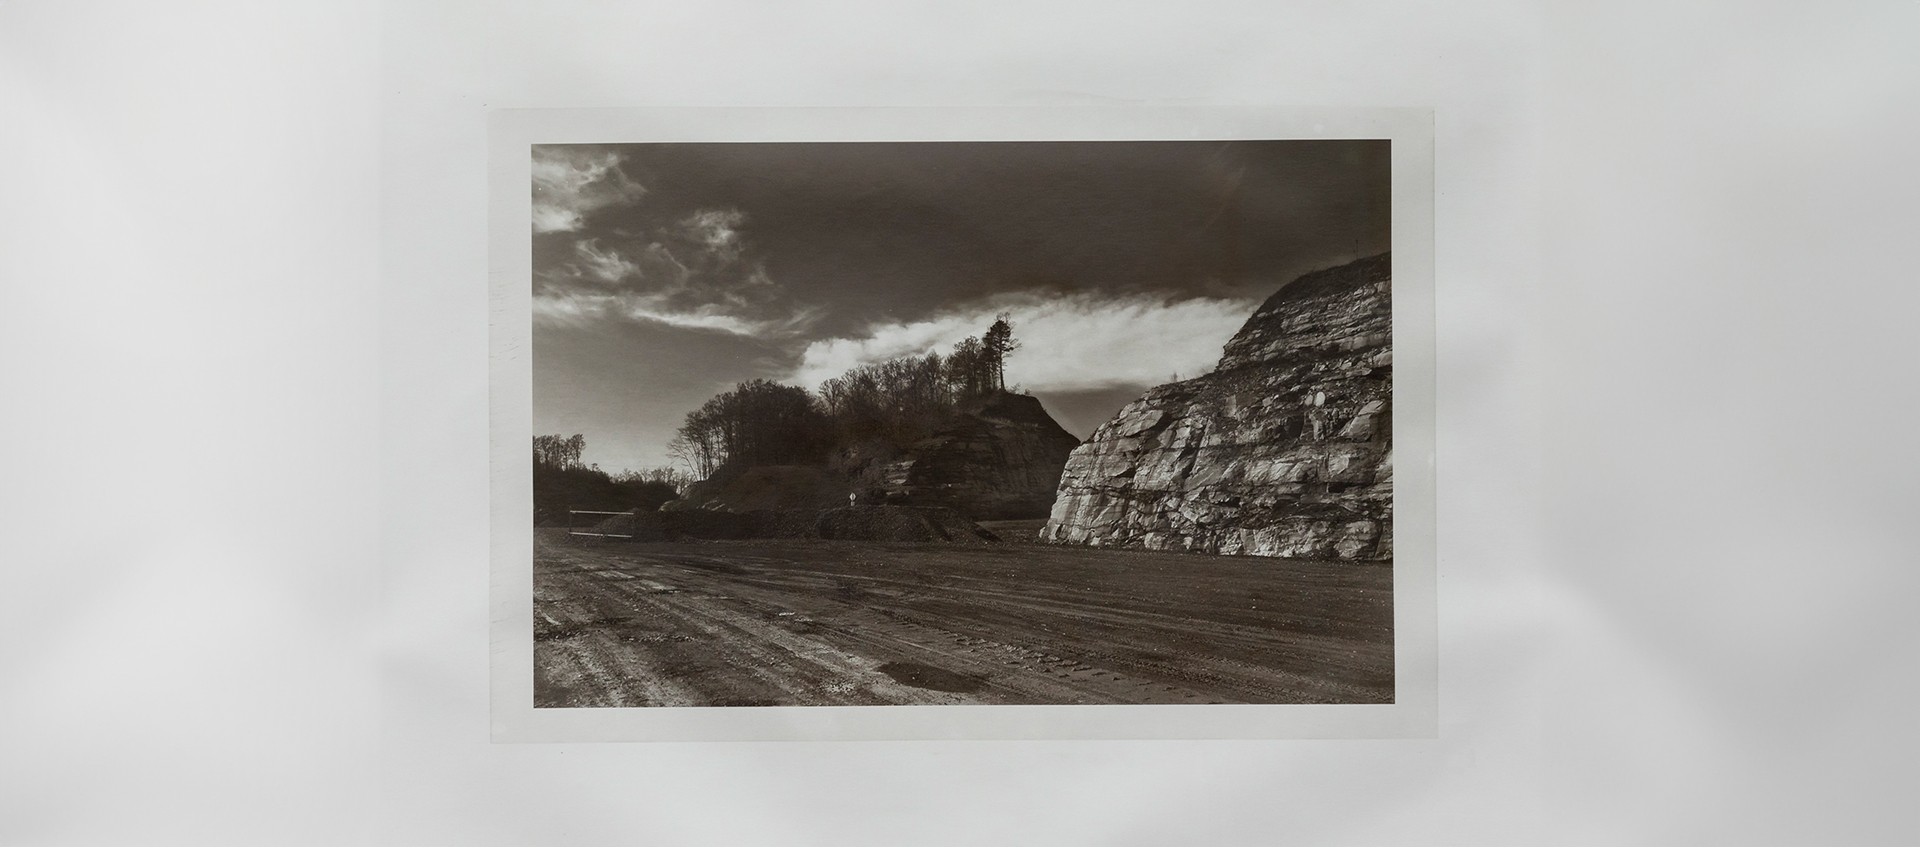 Framed black-and-white photo of a dirt road running diagonally across the composition with tall, partly tree-covered rock faces to the right. 